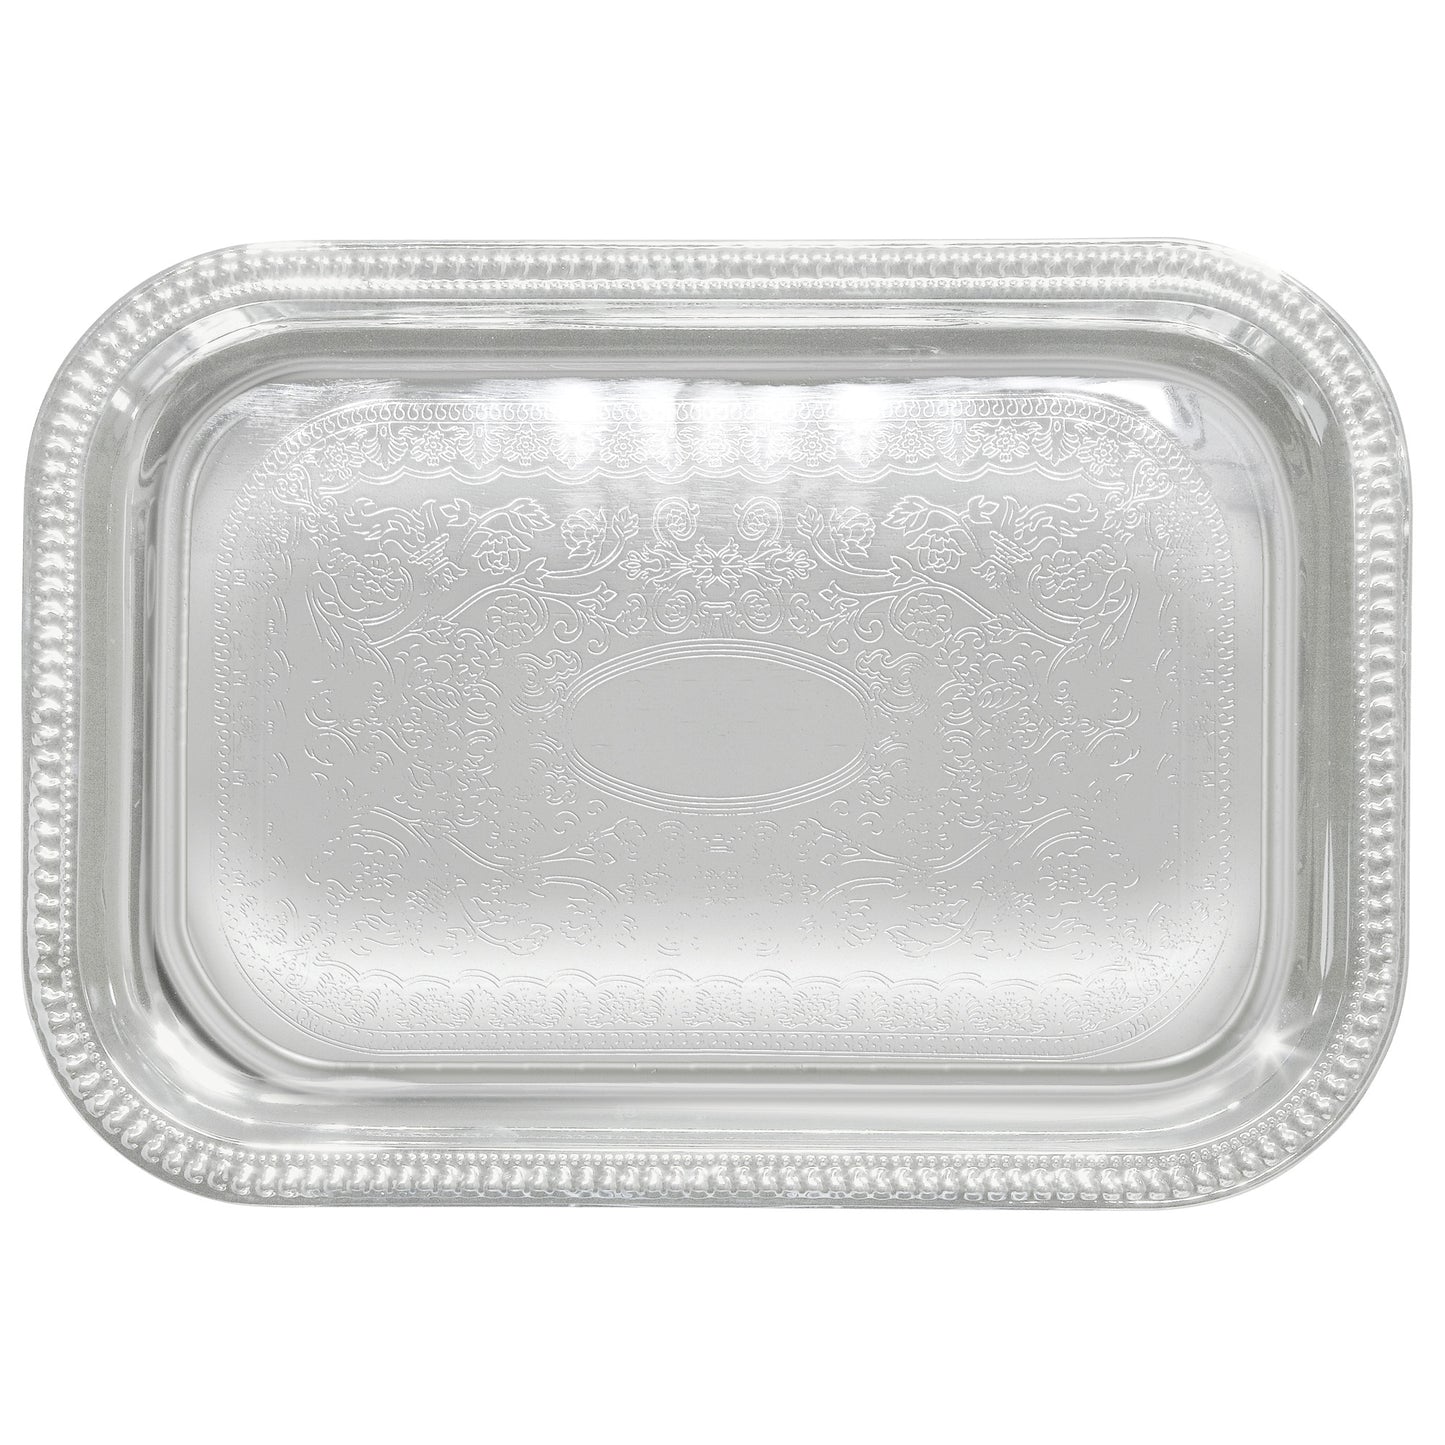 CMT-2014 - Chrome-Plated Serving Tray - Rectangular, 20 x 14